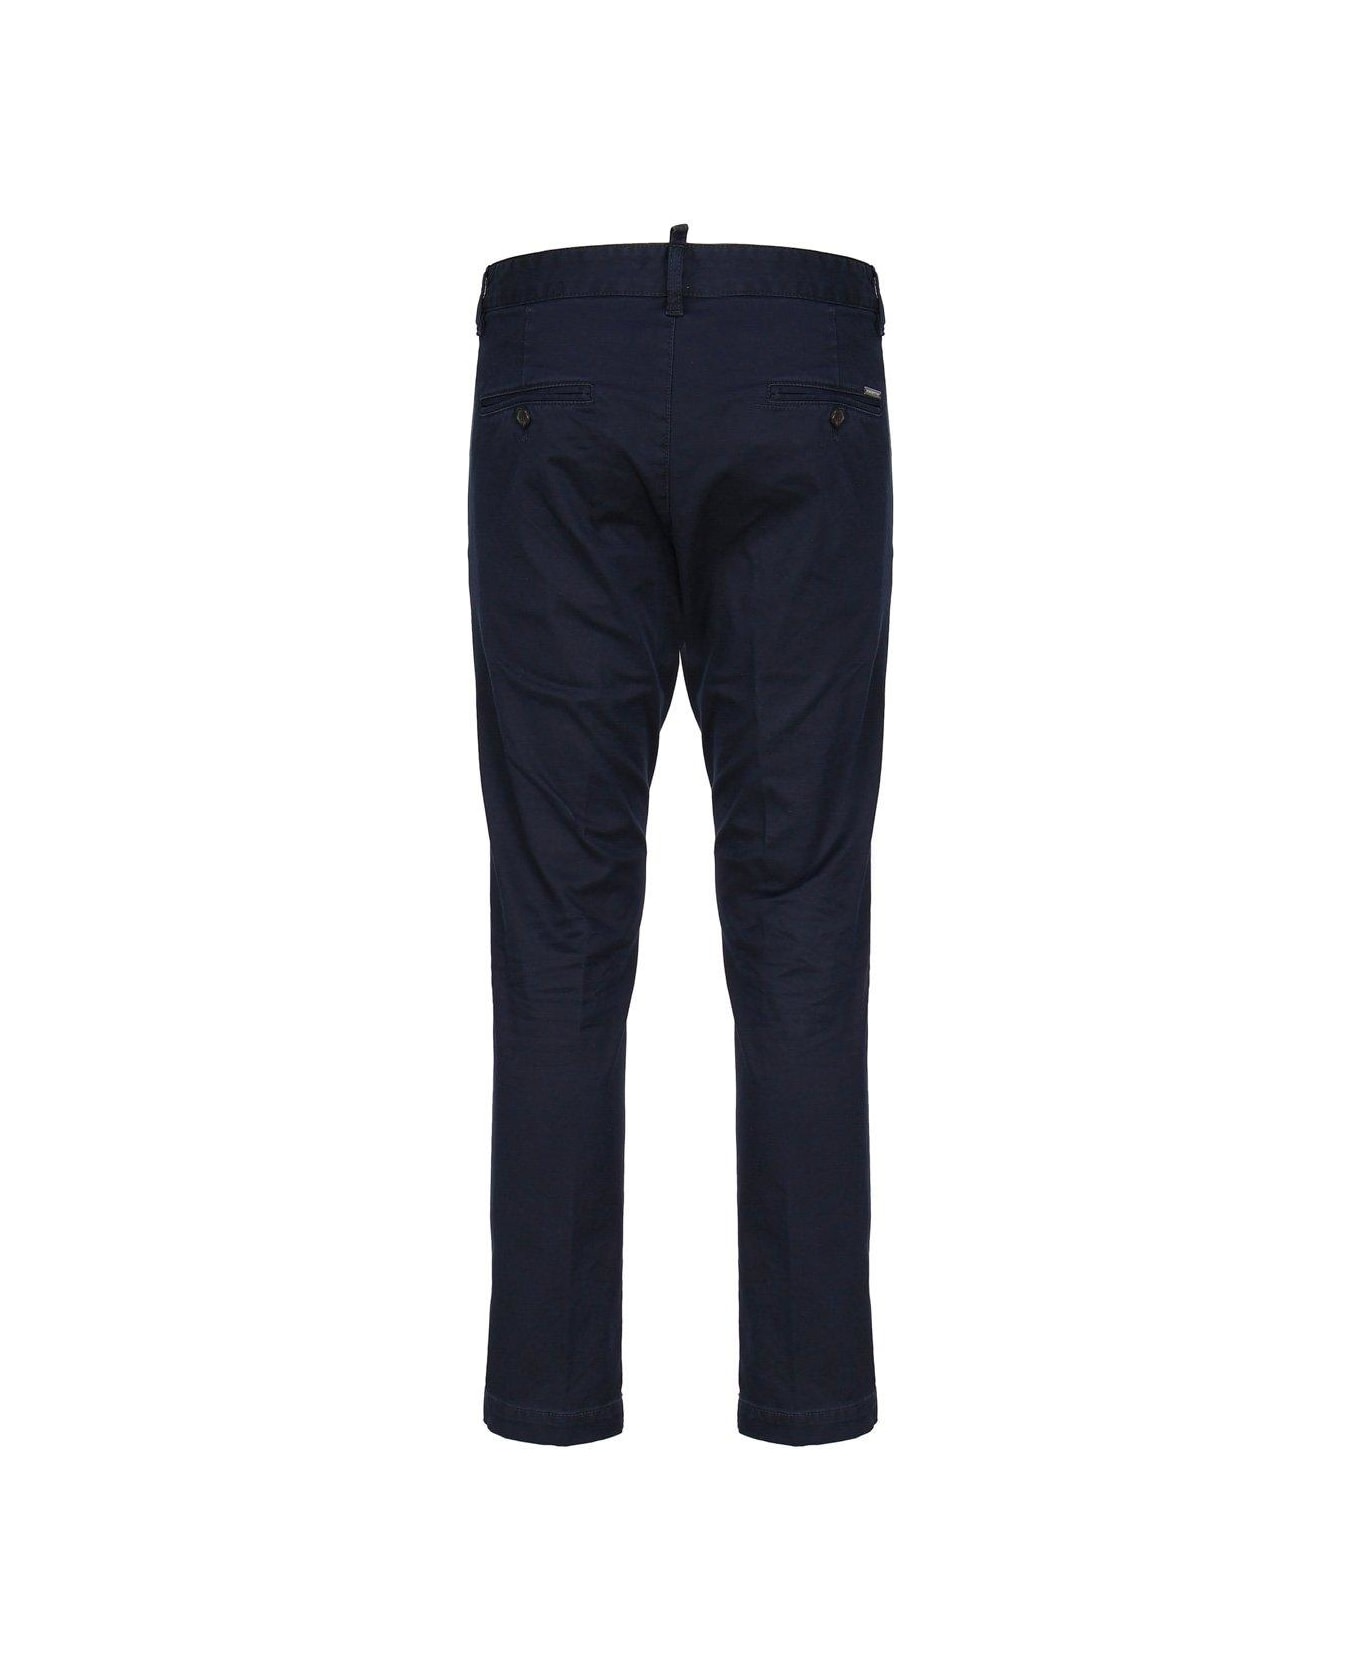 Dsquared2 Cool Guy Pant - Navy Blue ボトムス